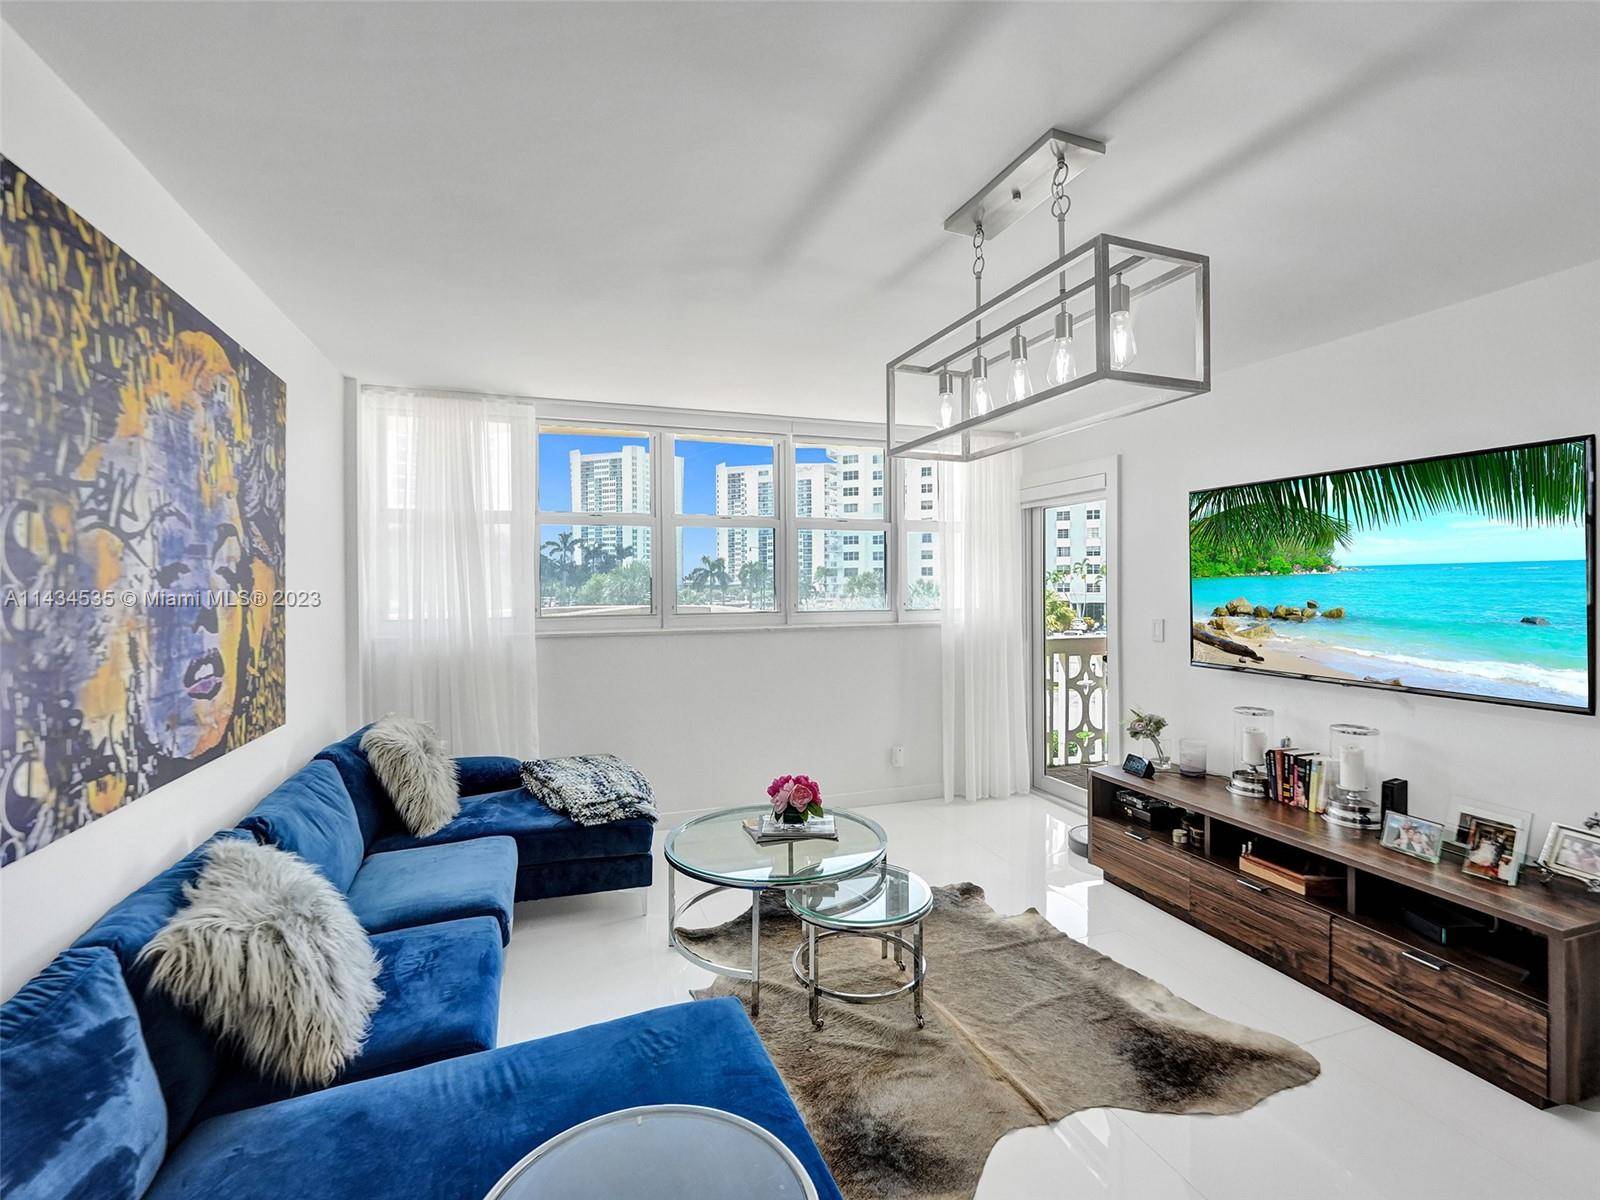 Beautifully renovated fully furnished turn key 1 1 located in the heart of Hallandale Beach, directly across the street from the ocean.